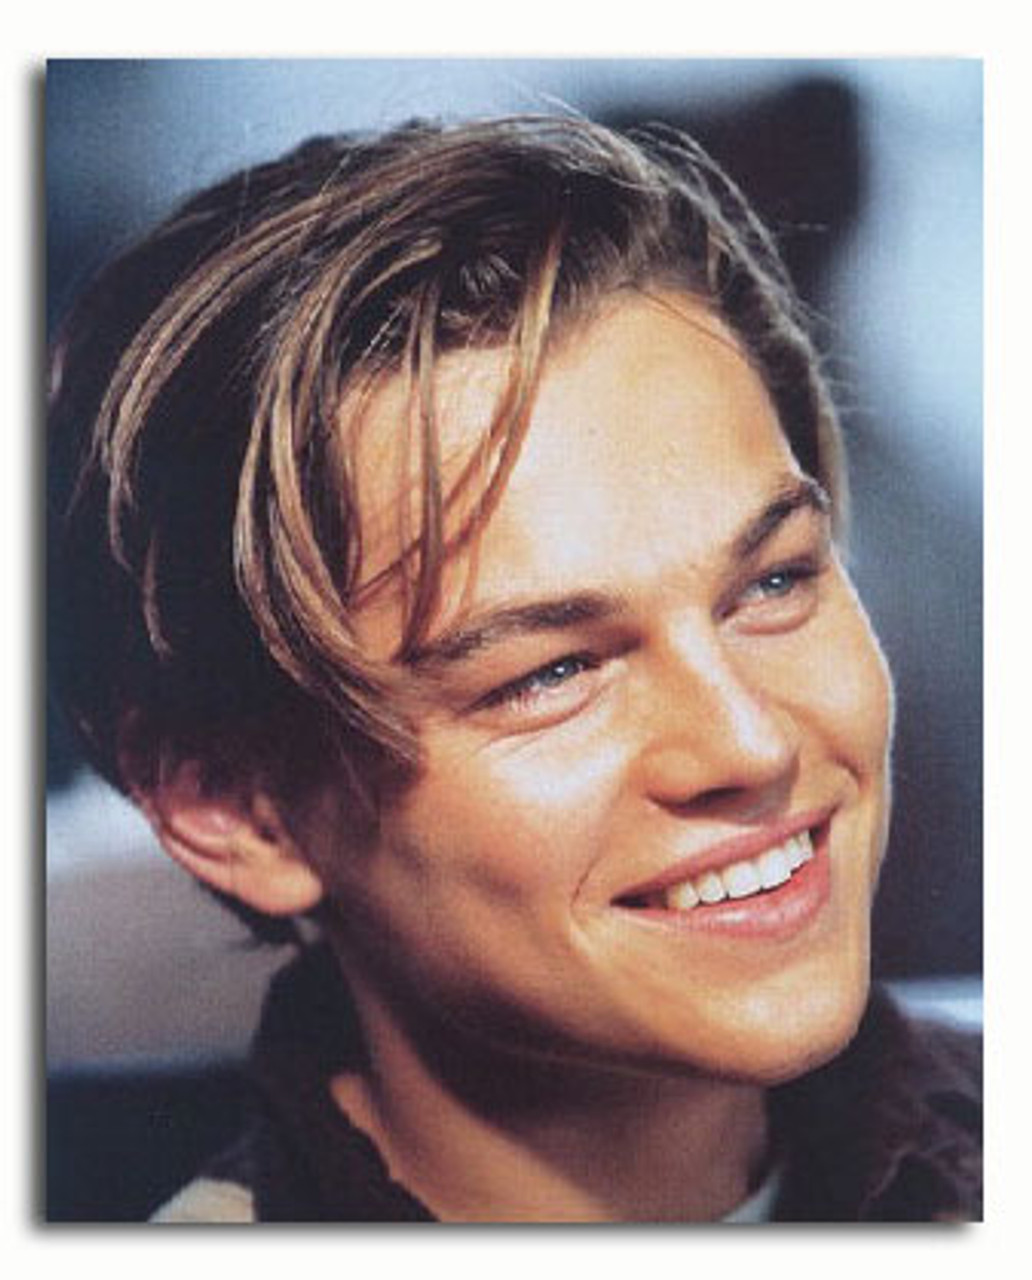 SS3012672) Movie picture of Leonardo DiCaprio buy celebrity photos and  posters at 